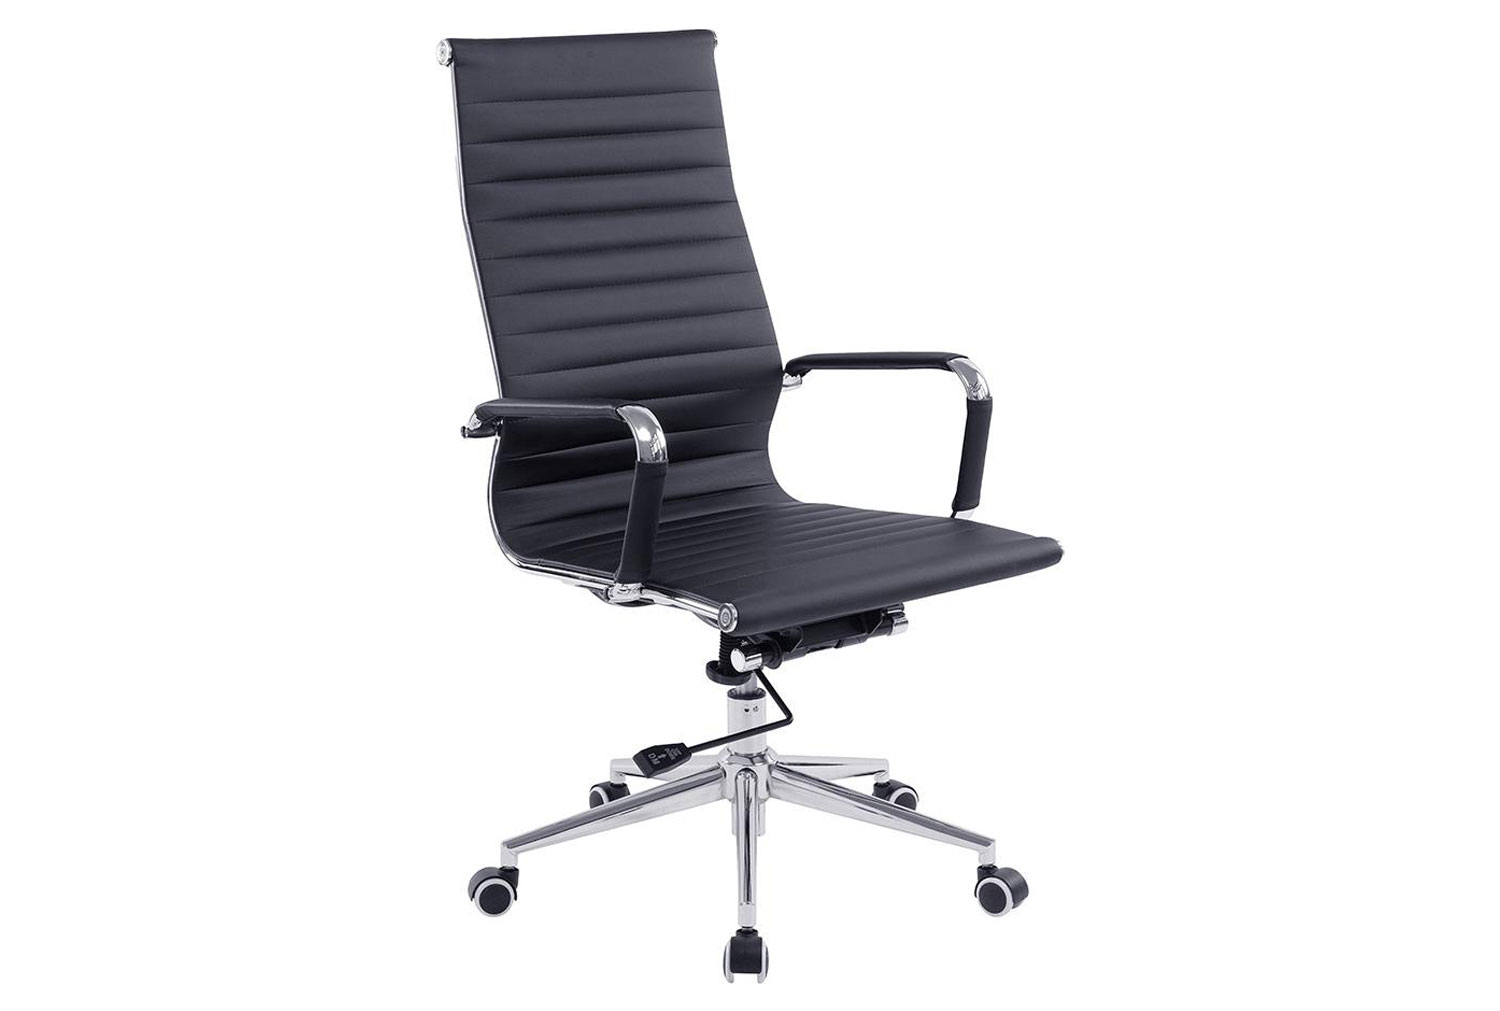 Andruzzi High Back Black Bonded Leather Executive Office Chair, Black, Express Delivery